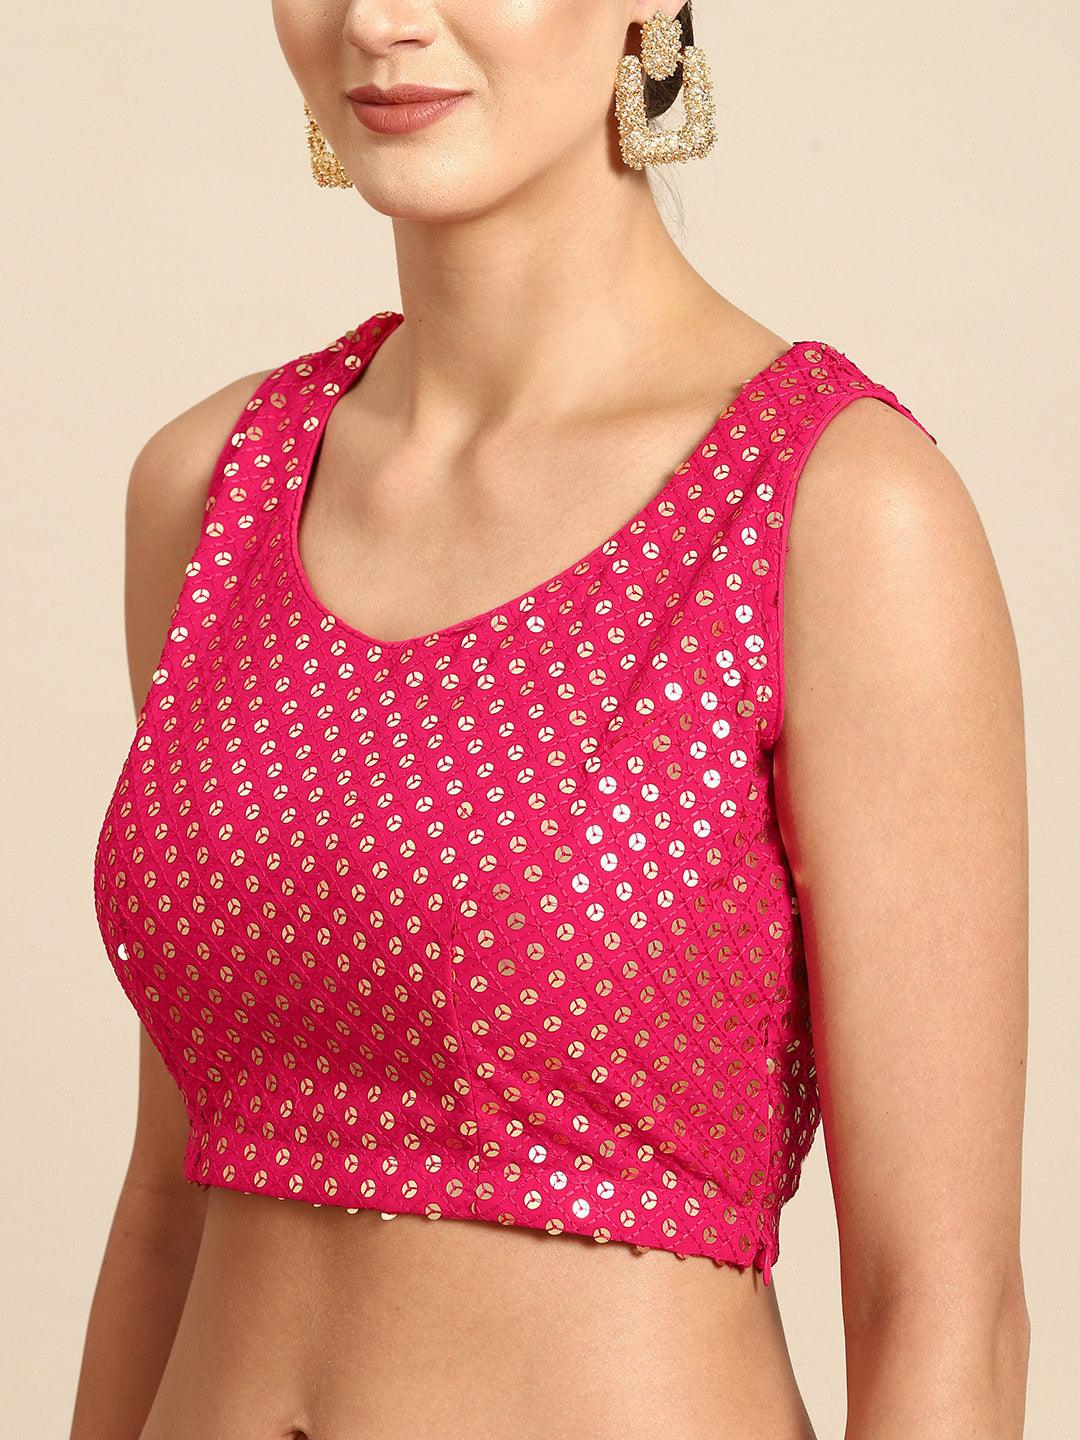 Pink Embellished Georgette Ready to Wear Saree - Libas